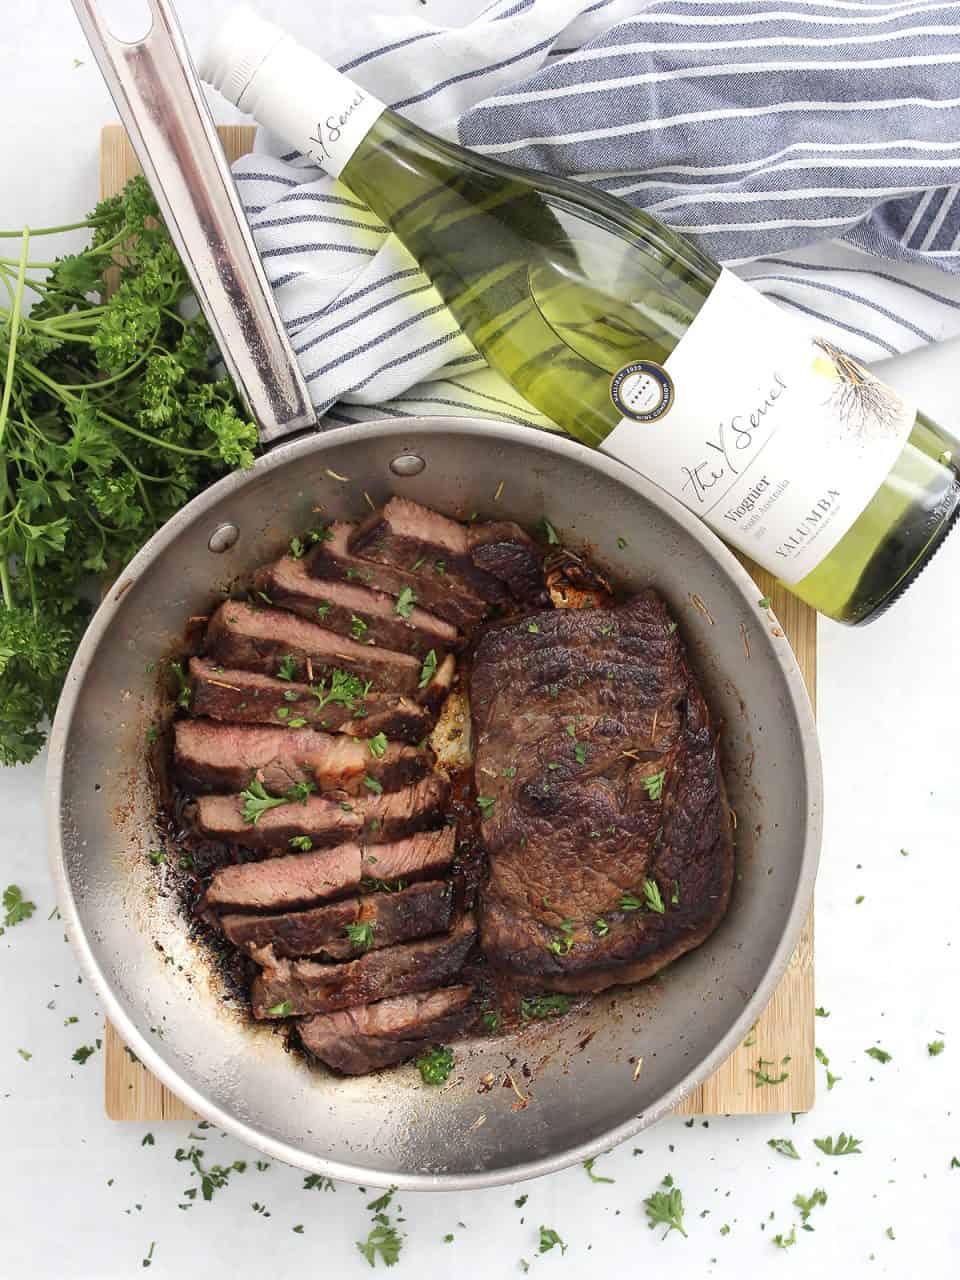 White wine marinated ribeye steaks in a skillet garnished with fresh herbs.